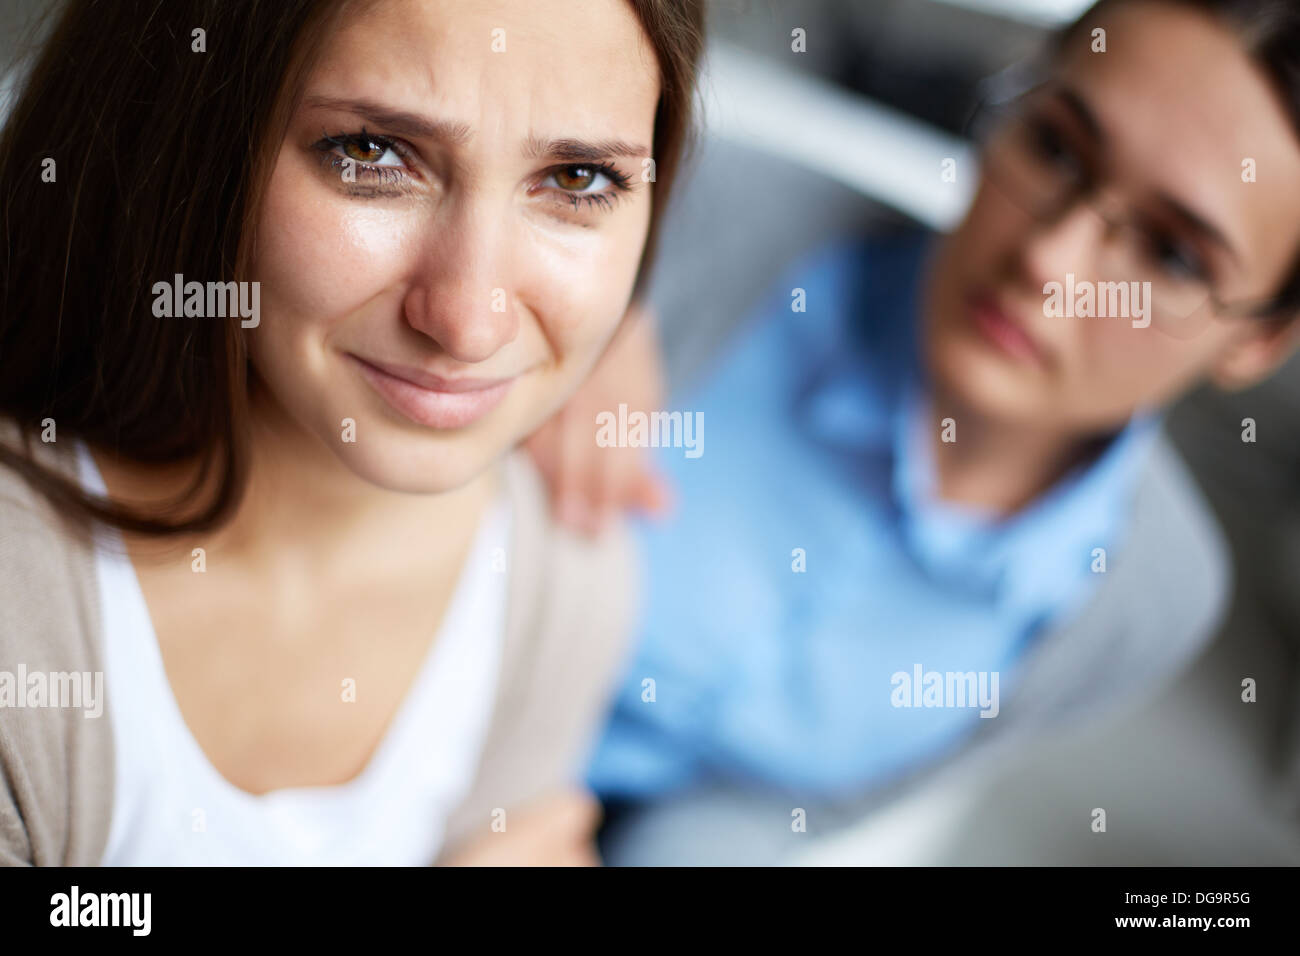 Crying girl looking at camera with her psychiatrist on background Stock Photo